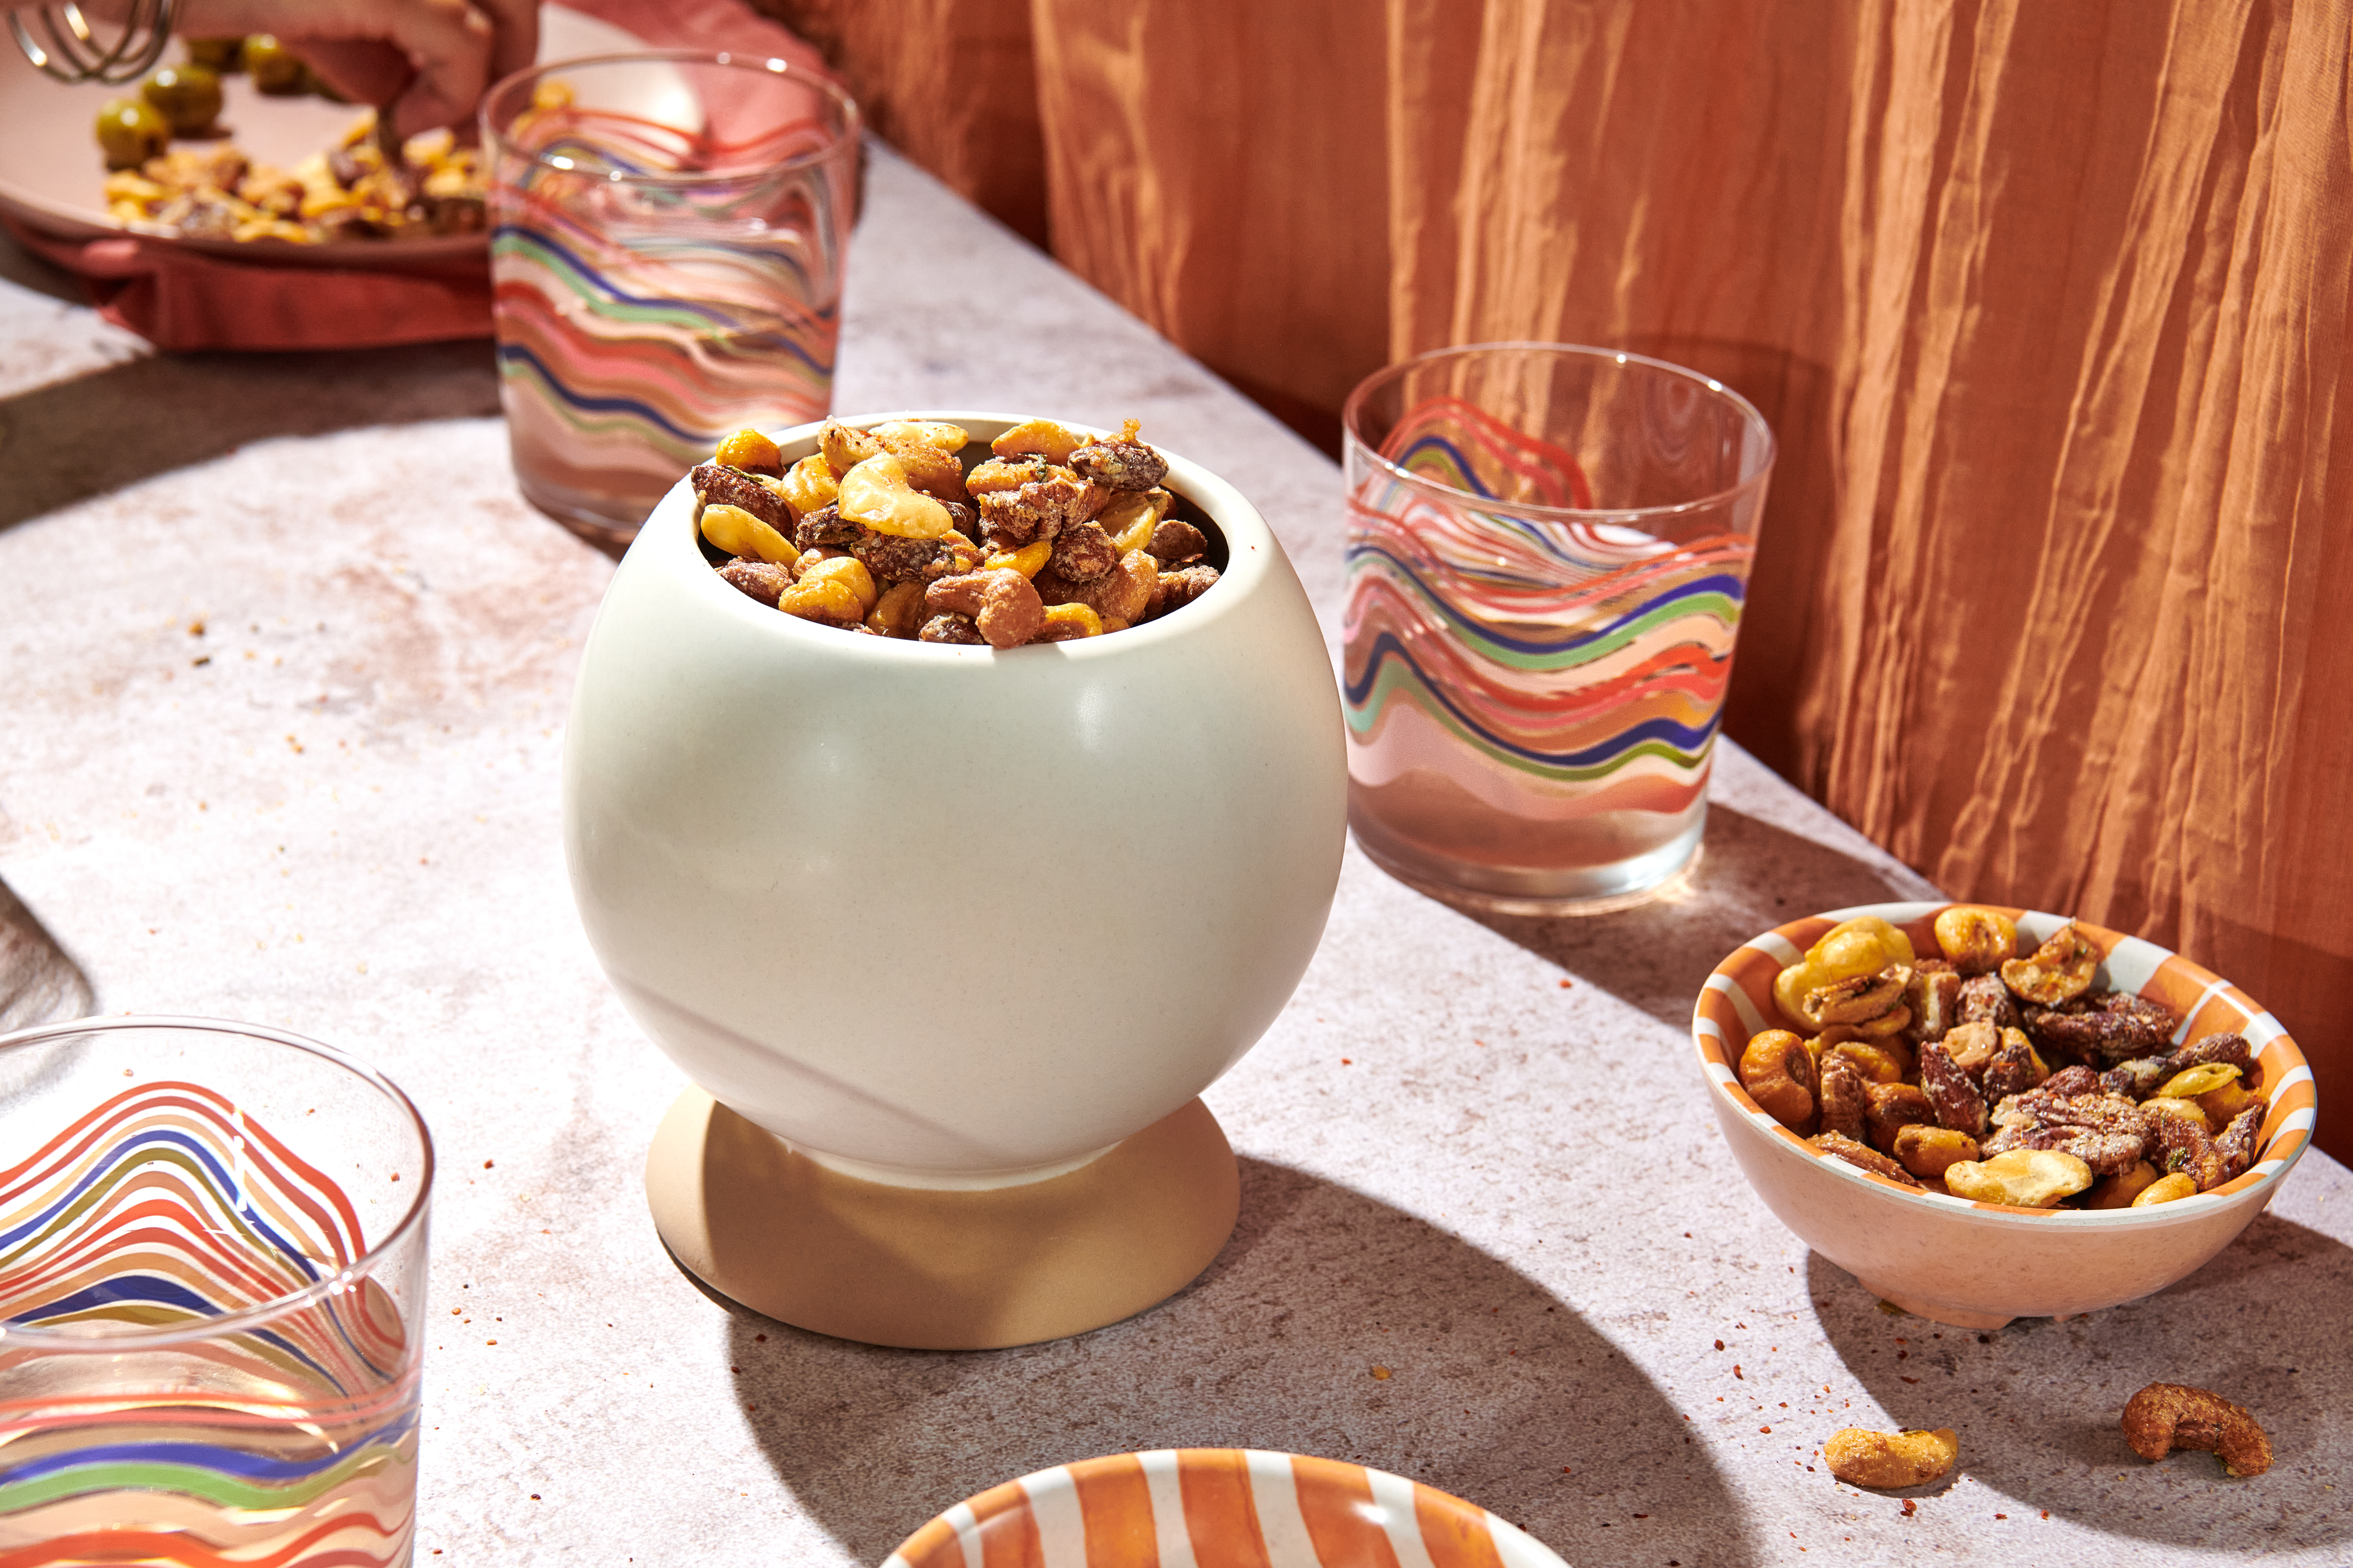 Bowls of Crunch Party snack mix, surrounded by colorful drinking glasses.